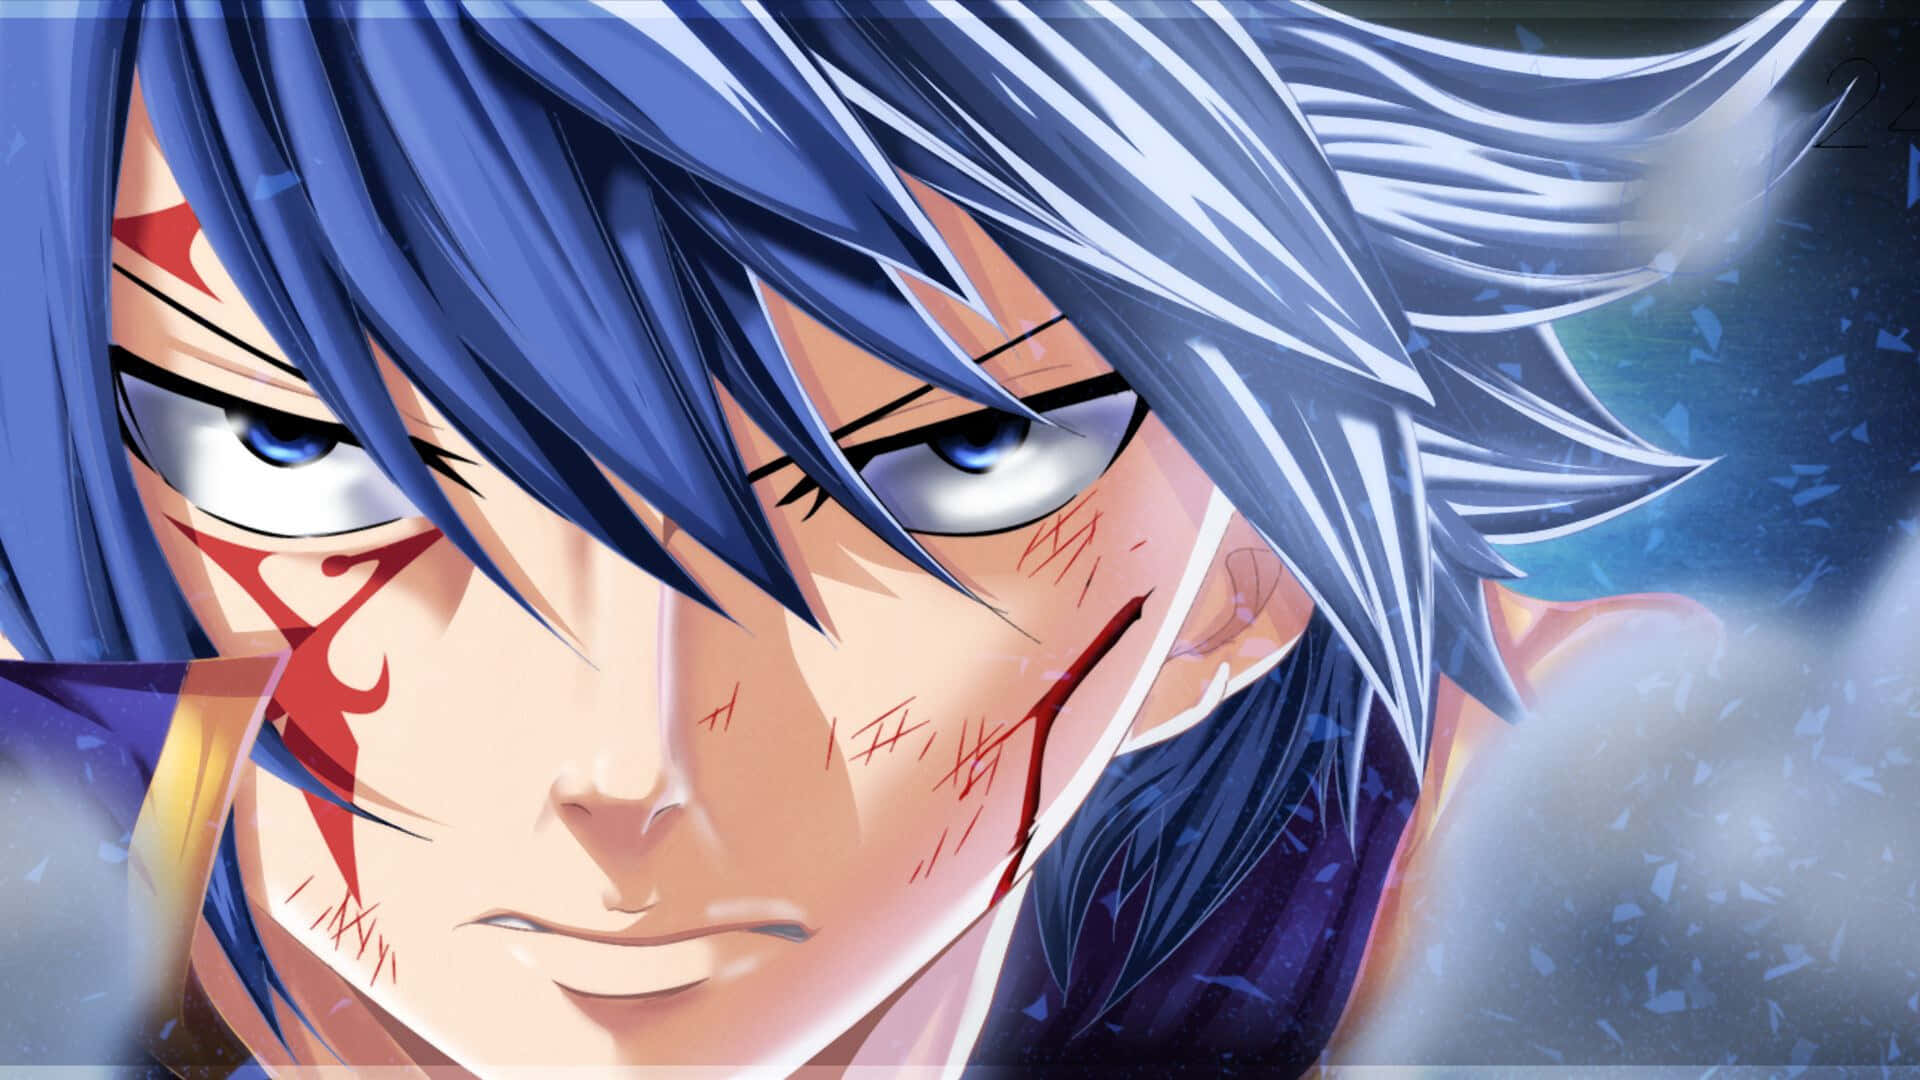 Jellal Fernandes, a powerful mage and enigmatic character in the anime series Fairy Tail Wallpaper